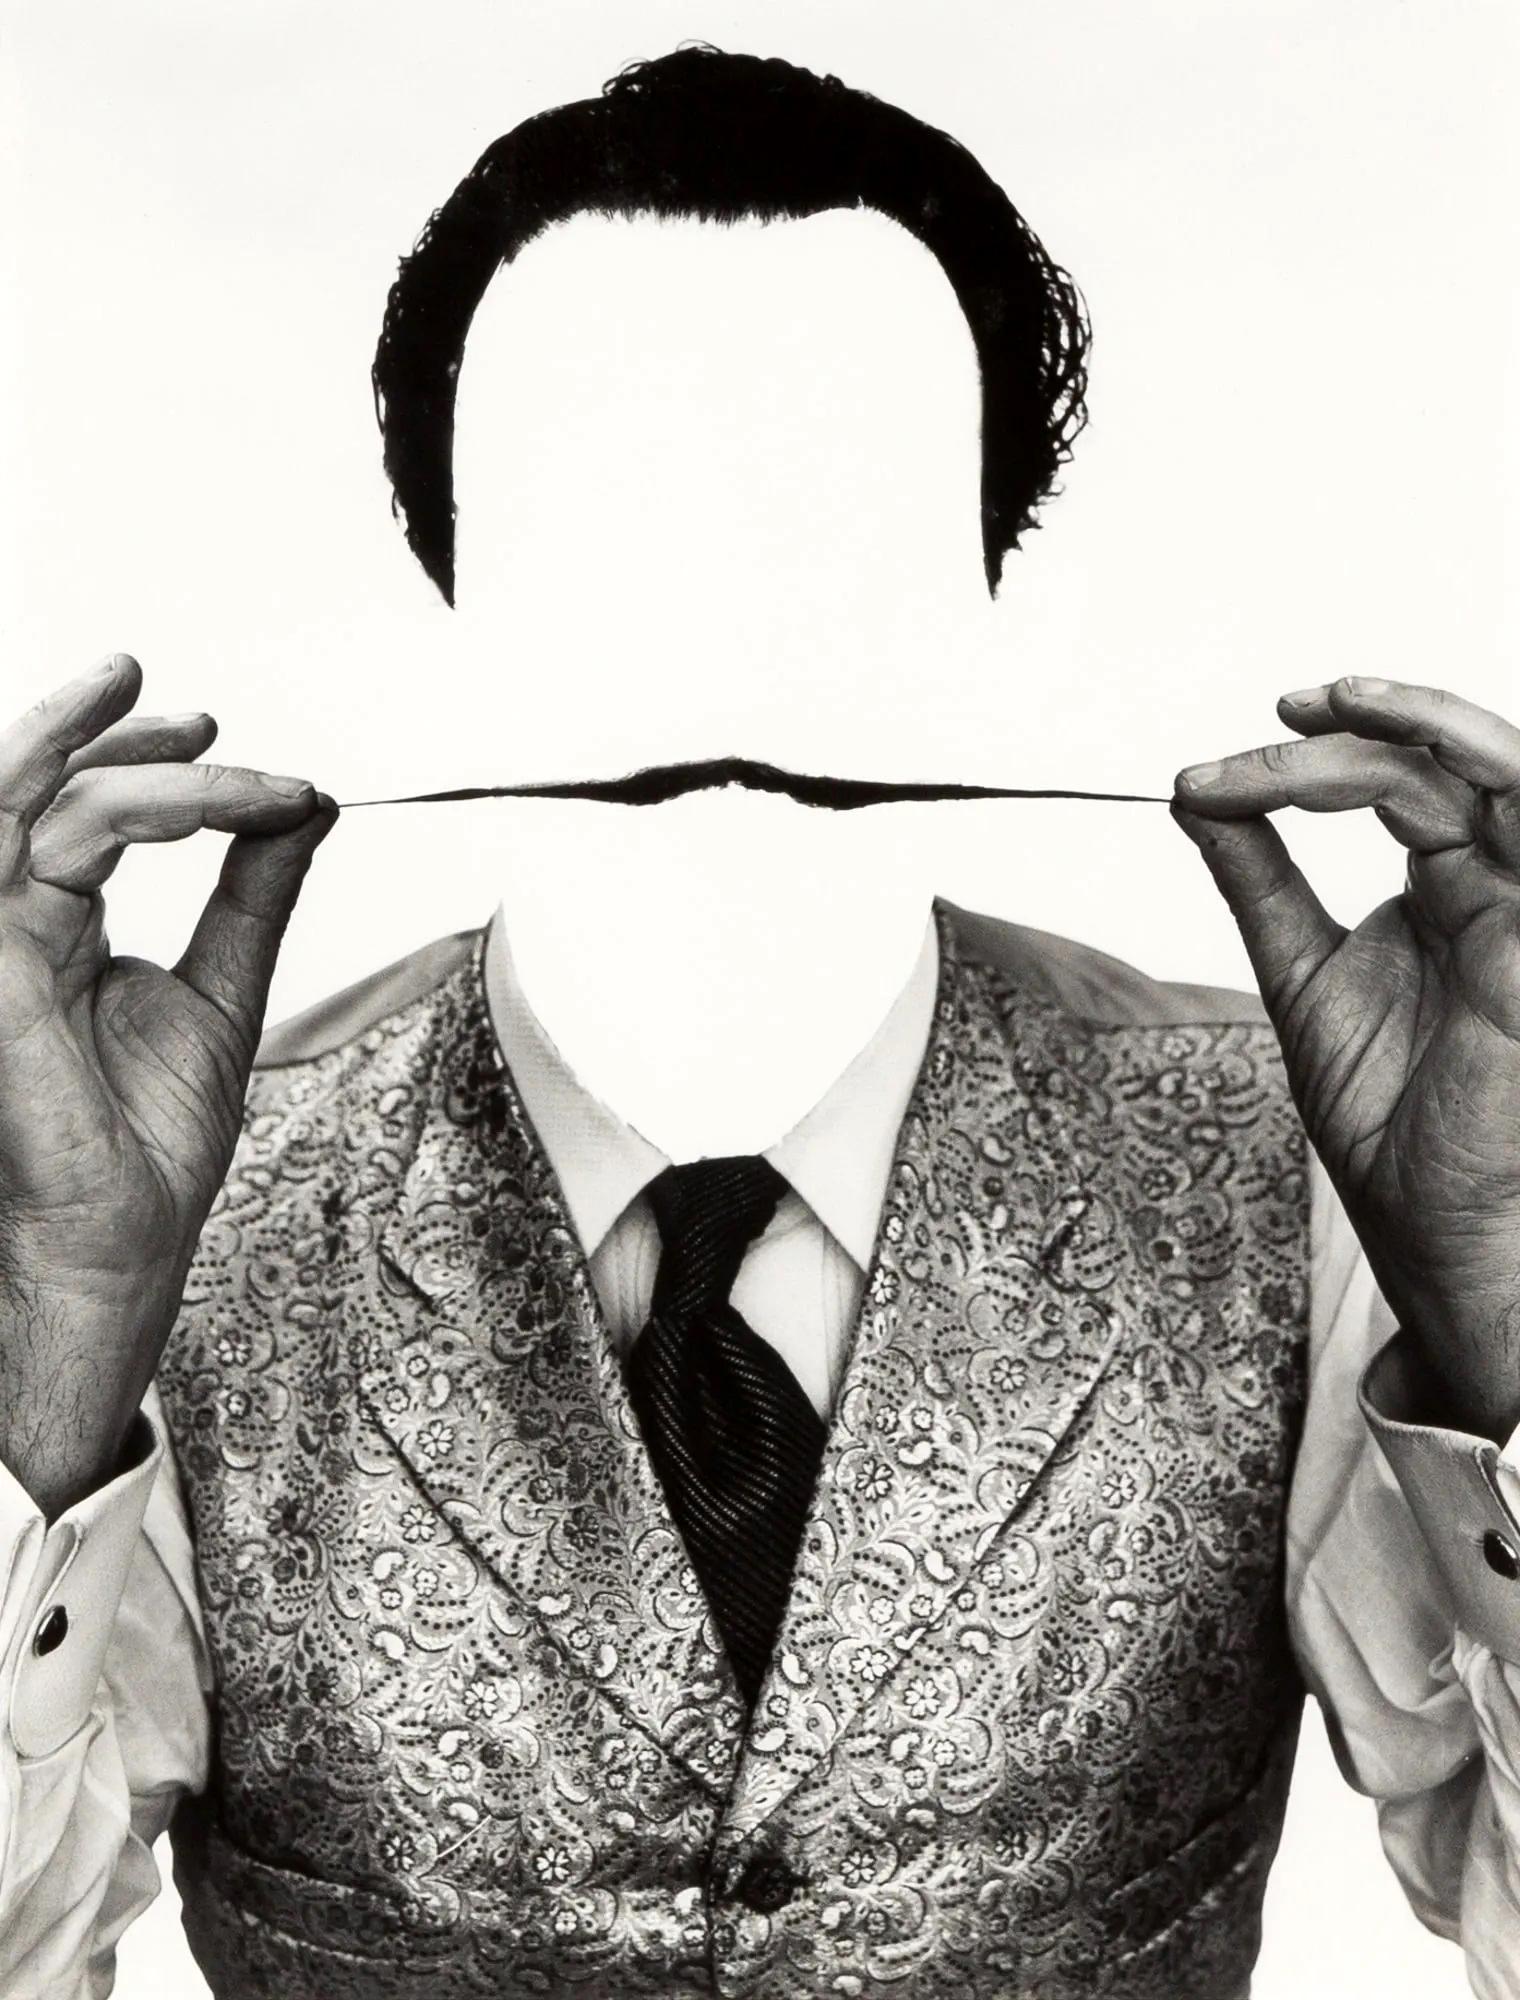 Artist: Philippe Halsman (1906-1979)
Medium: Gelatin Silver Print
Title: Invisible Dali
Date: 1954; Printed in 1981 as part of the ten-piece Dali Portfolio by Stephen Gersh and the Neikrug Press under the supervision of Halsman's widow